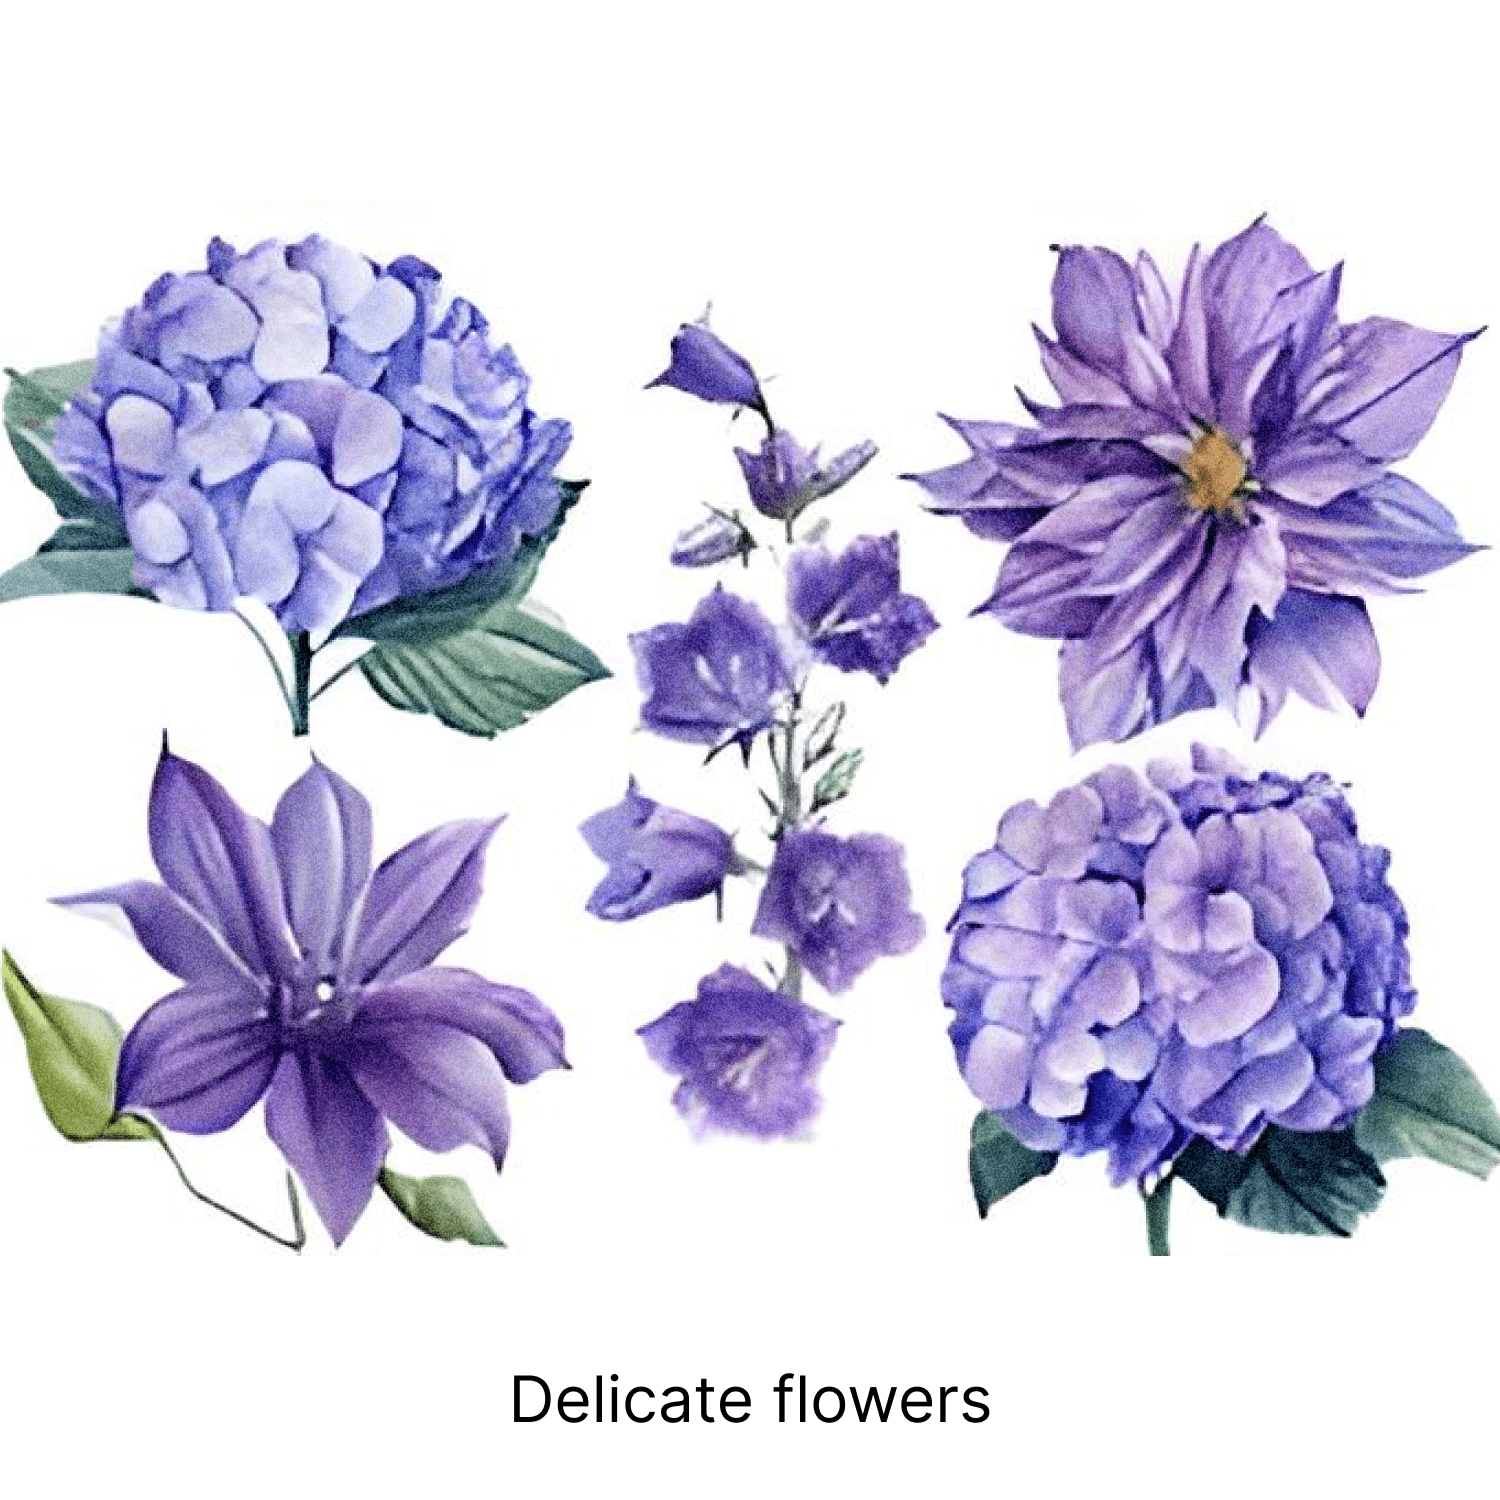 Delicate Flowers - Preview Image.